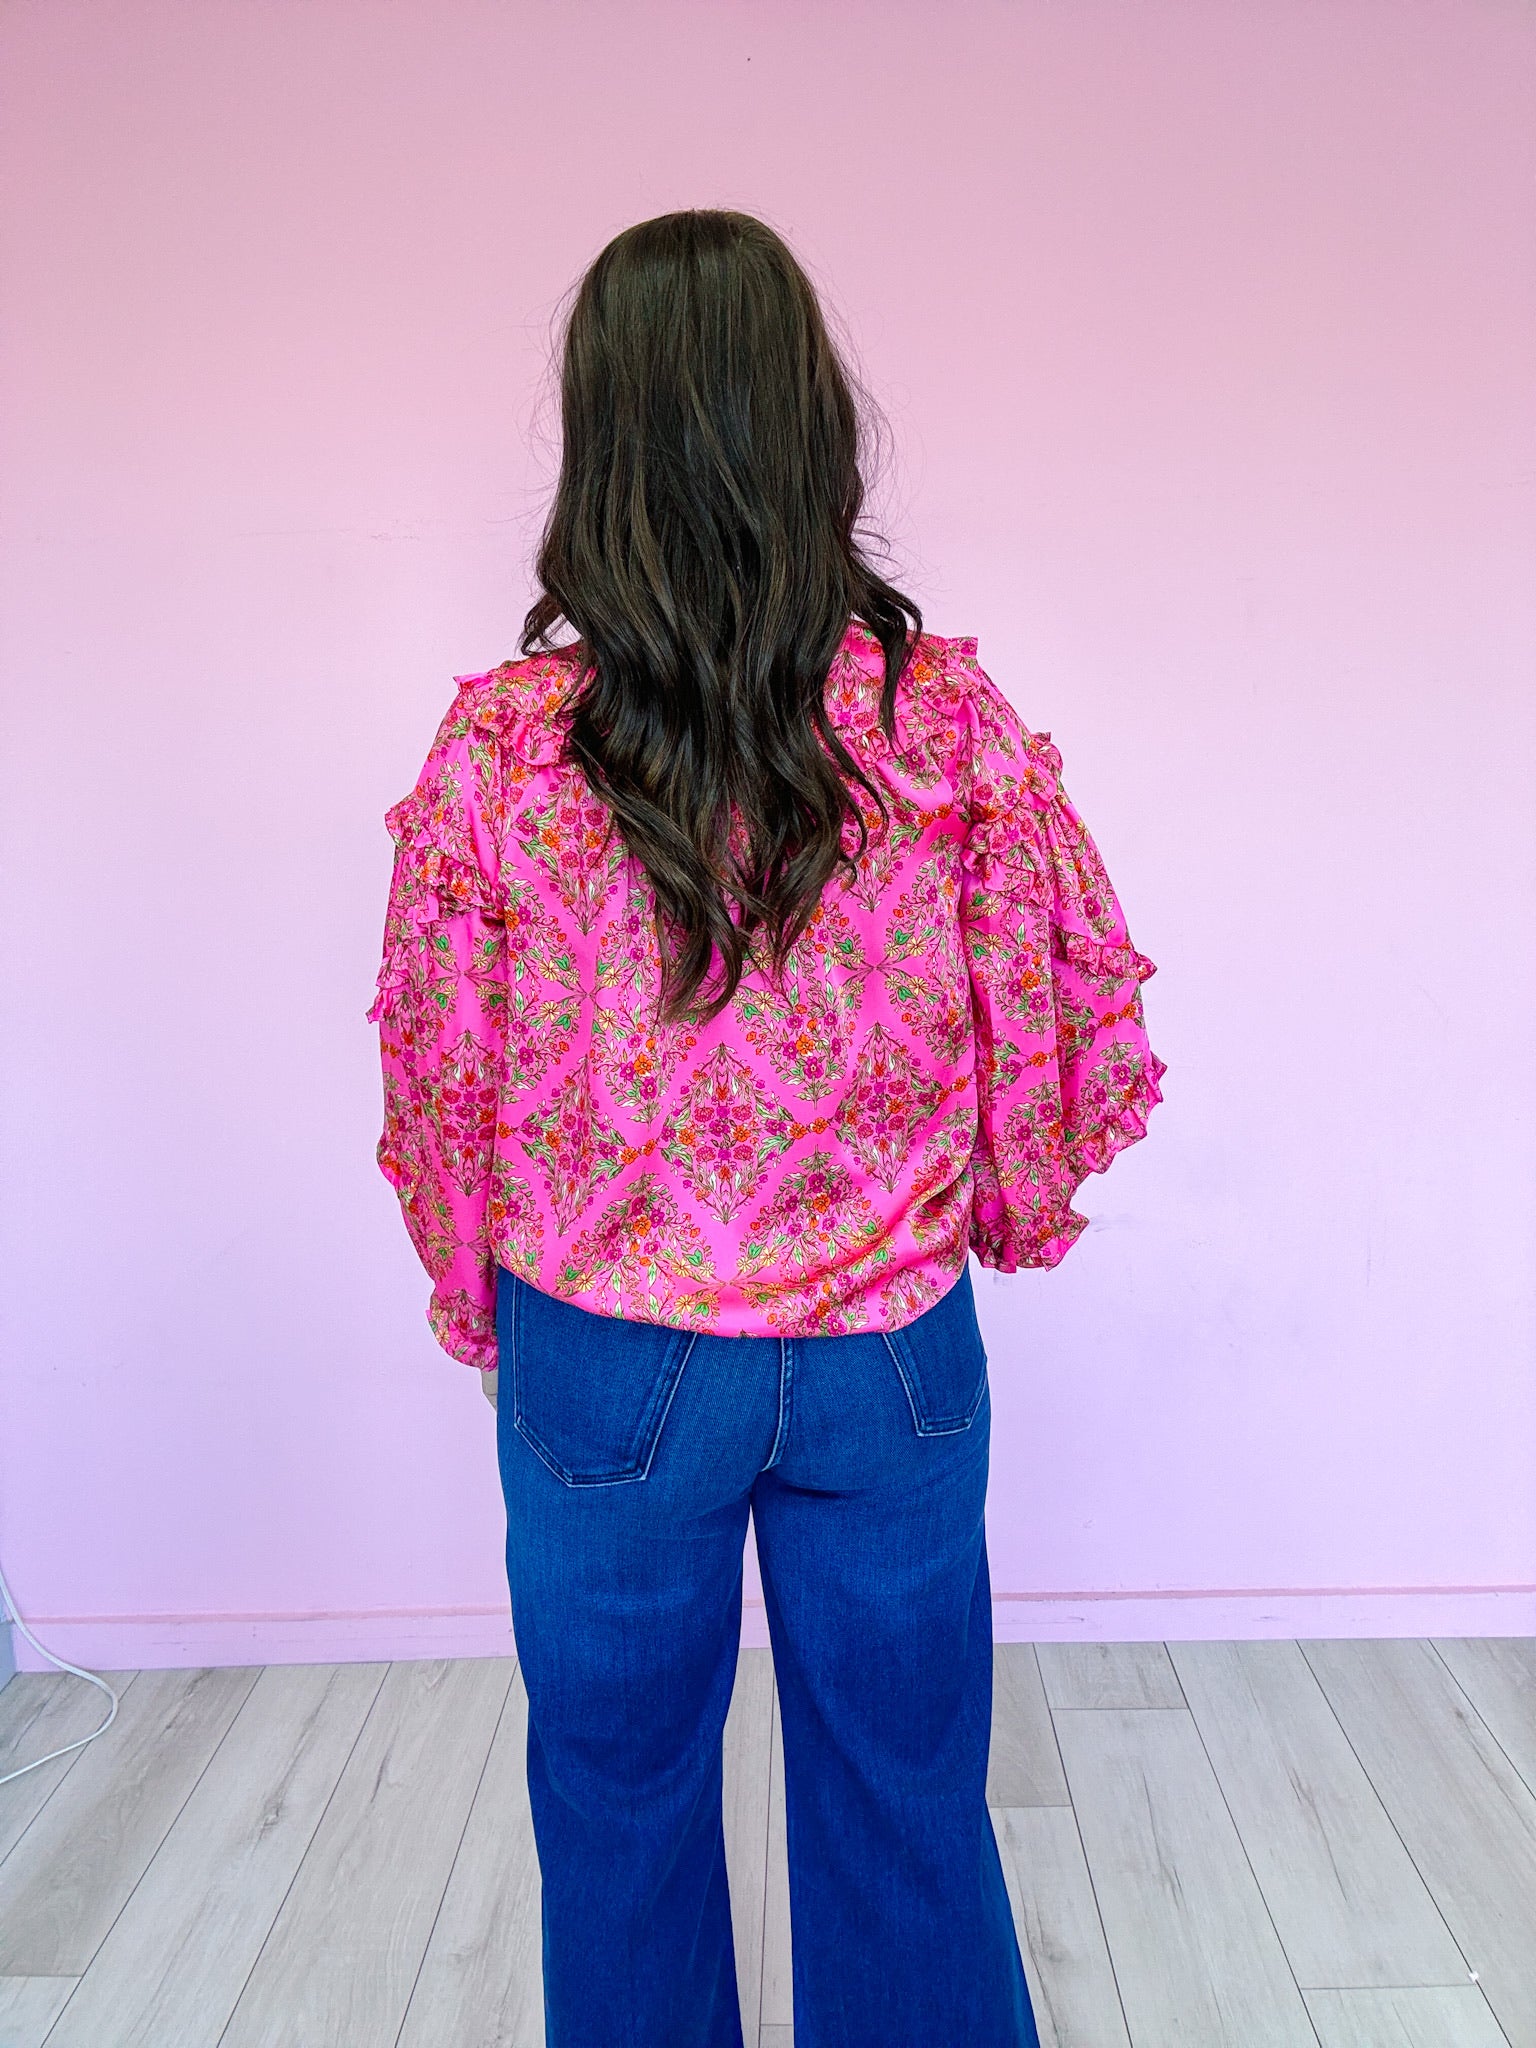 CONNECTED BY FLORALS RUFFLE BUTTON UP TOP - PINK